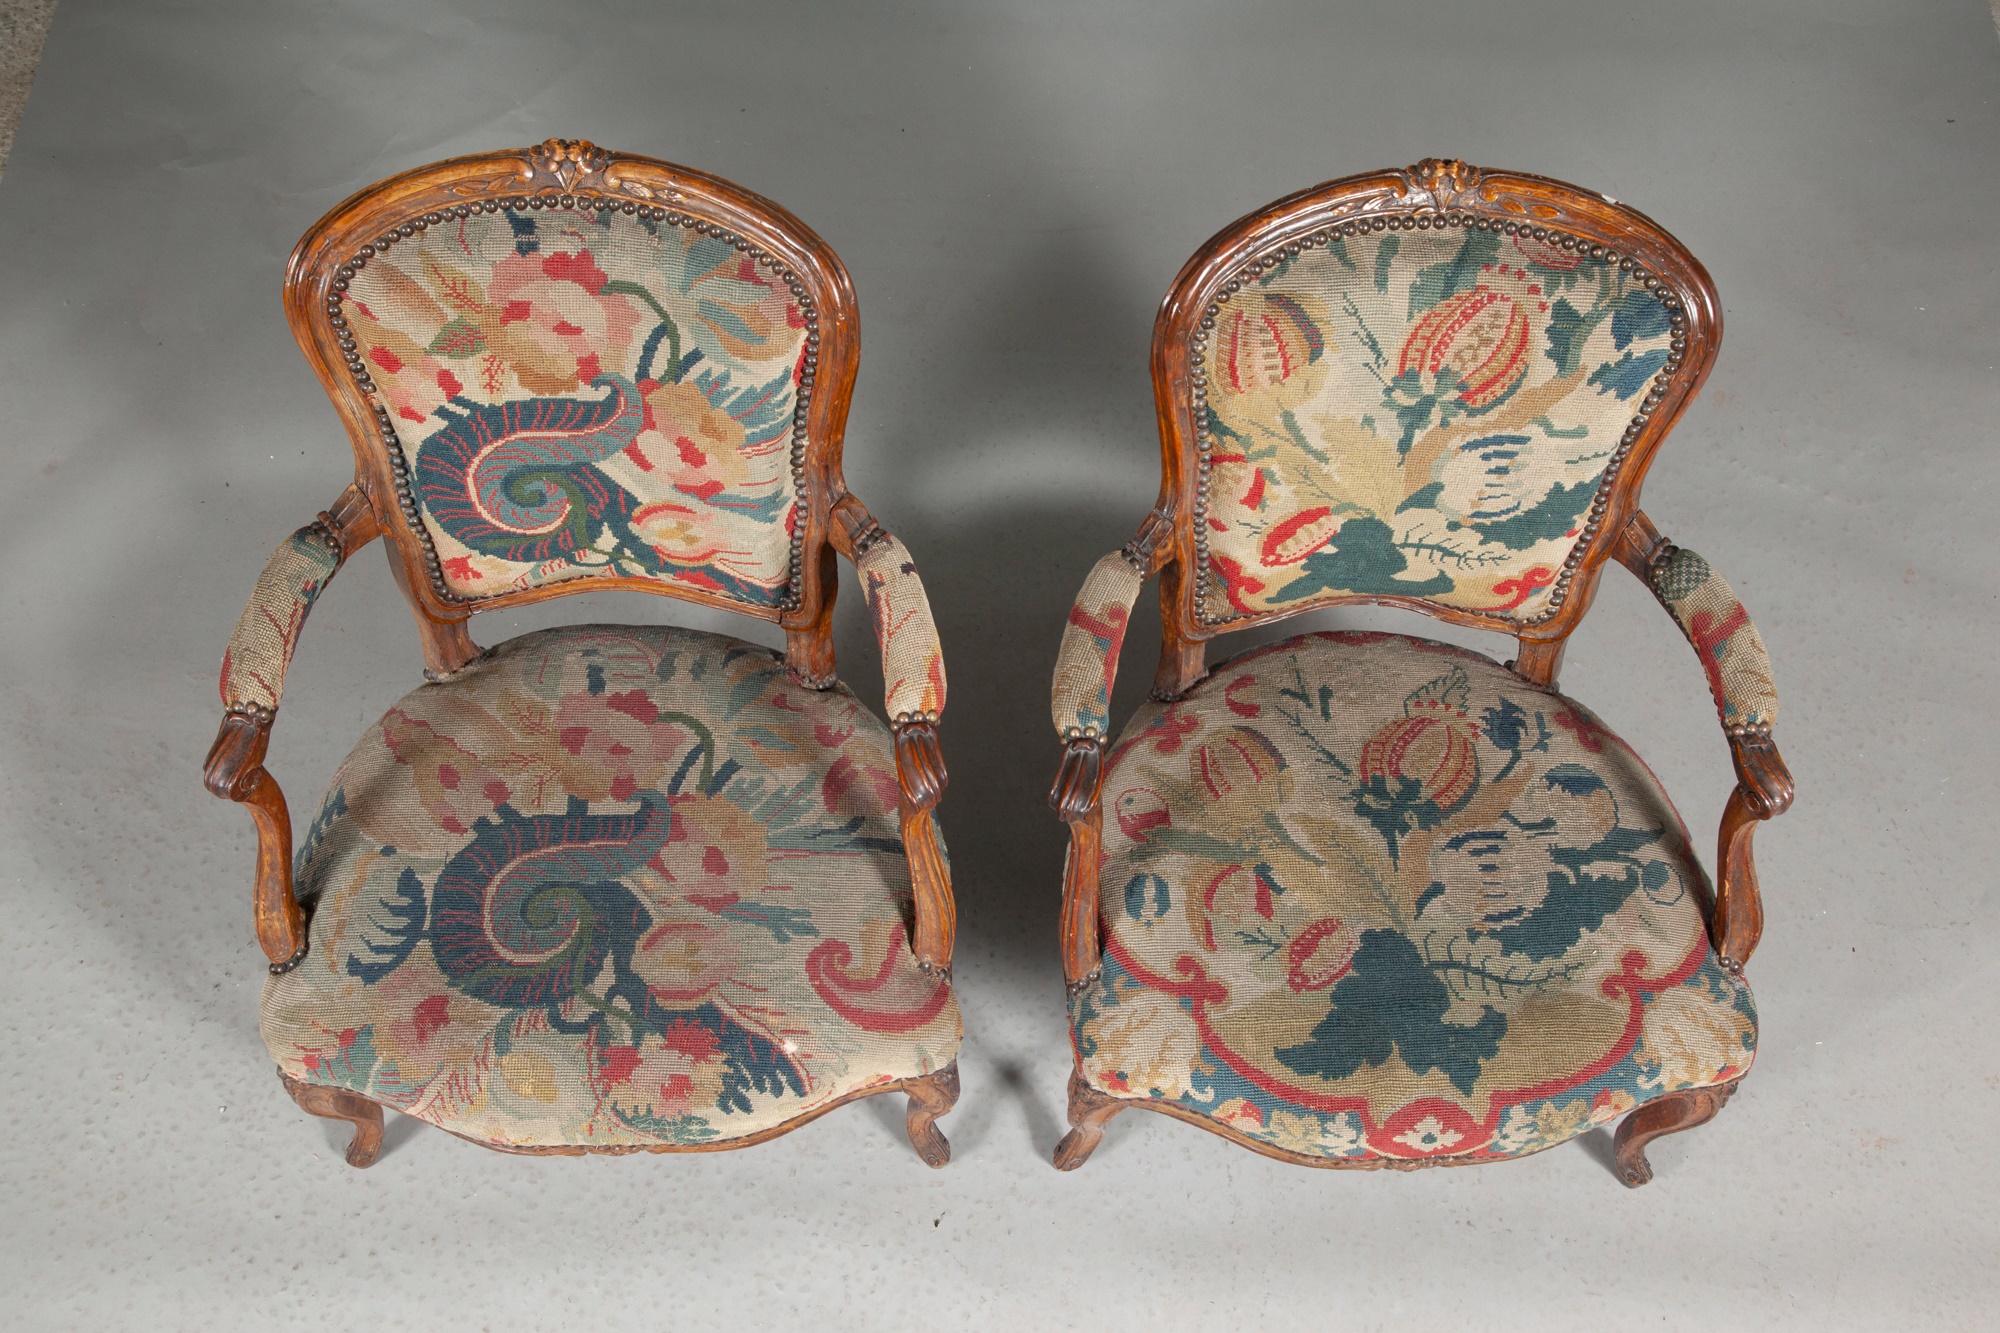 Assembled Group of Louis XV Needlework-Upholstered Beechwood Fauteuils - Image 6 of 8